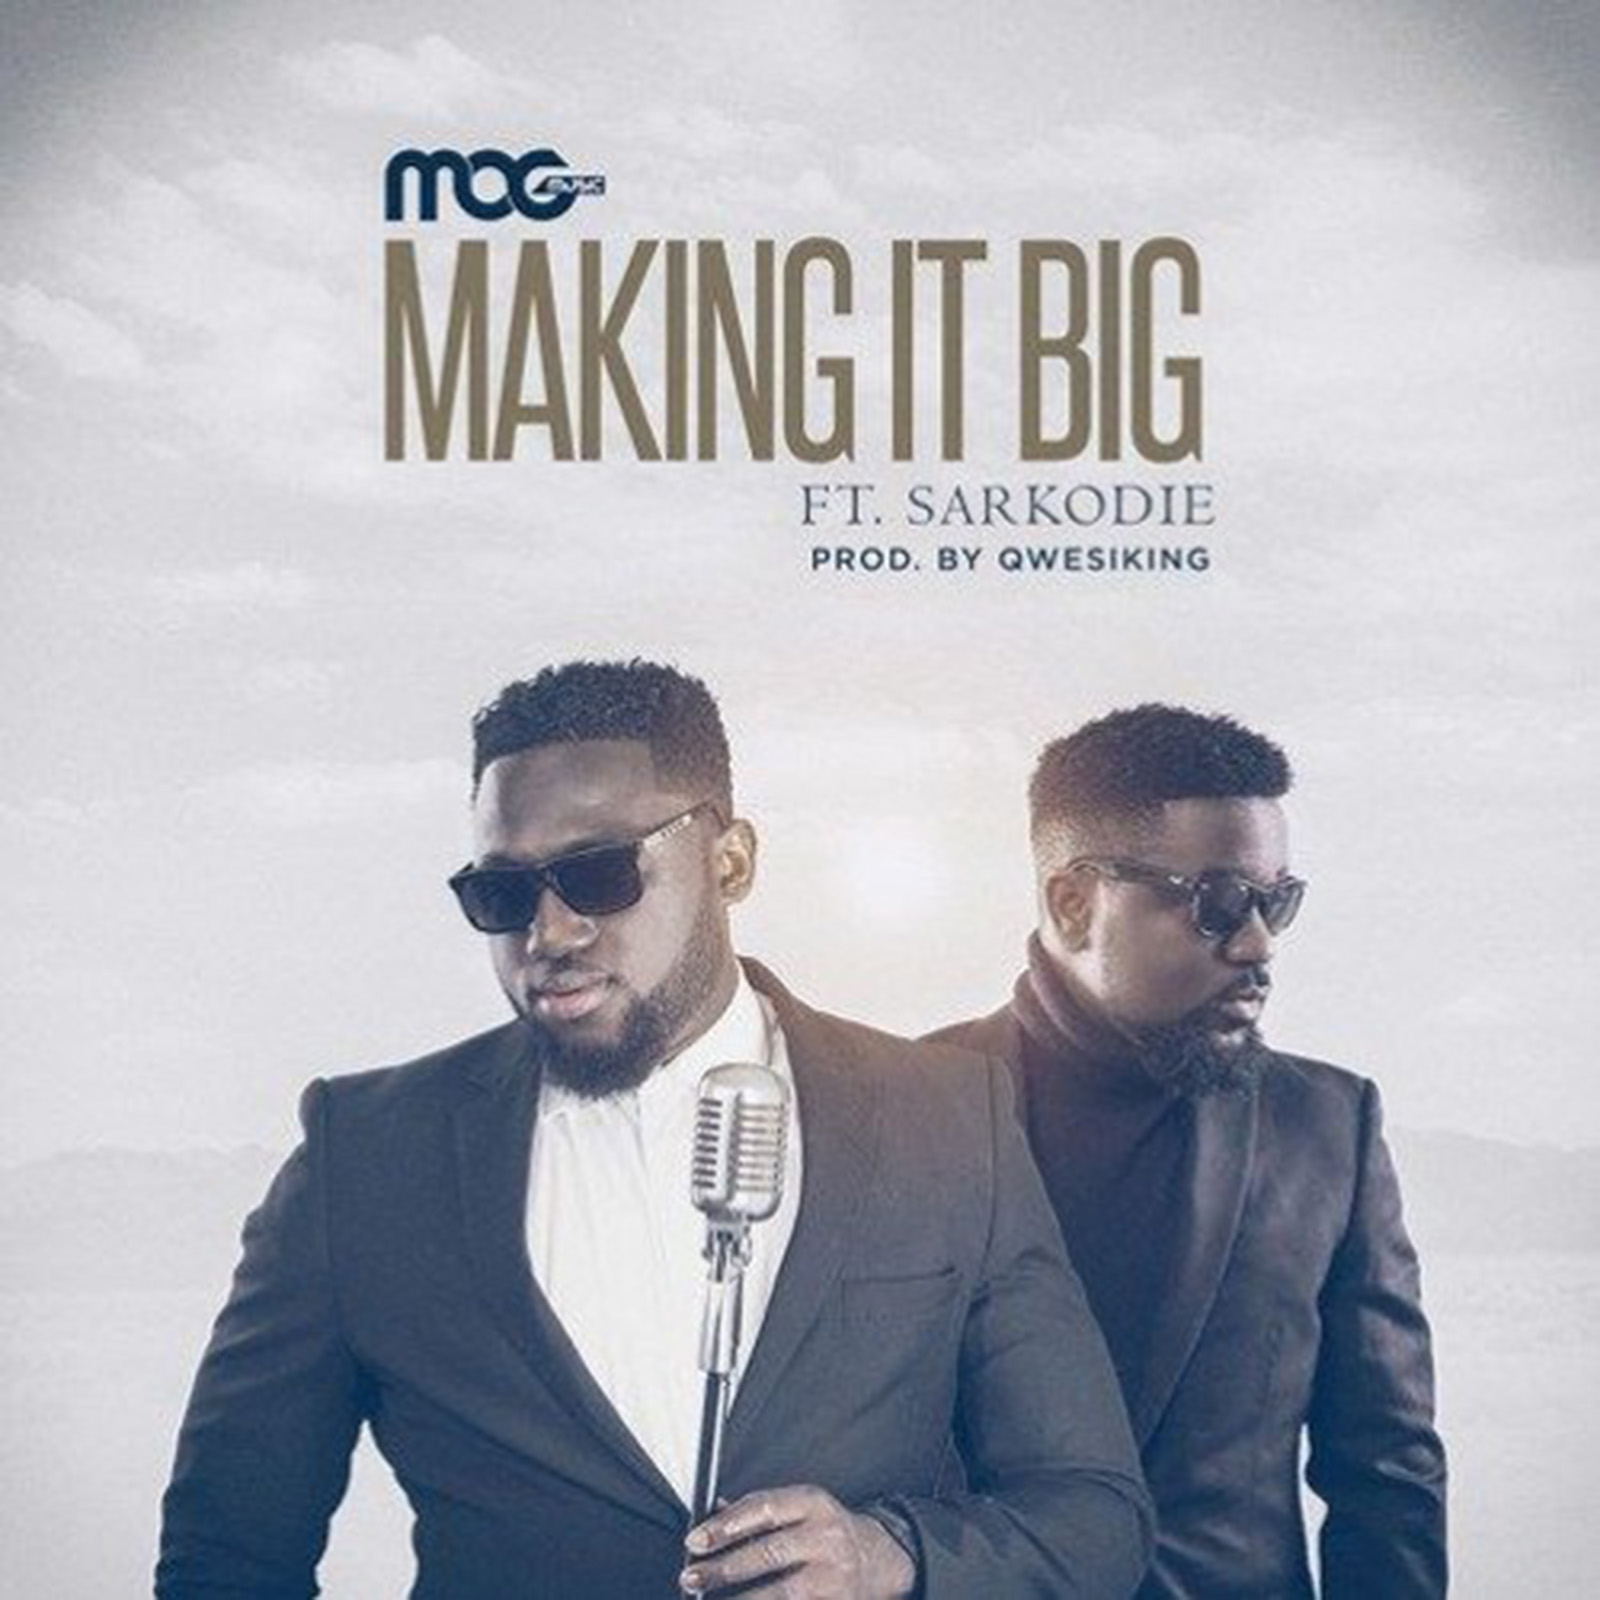 Making It Big by MOG Music feat. Sarkodie